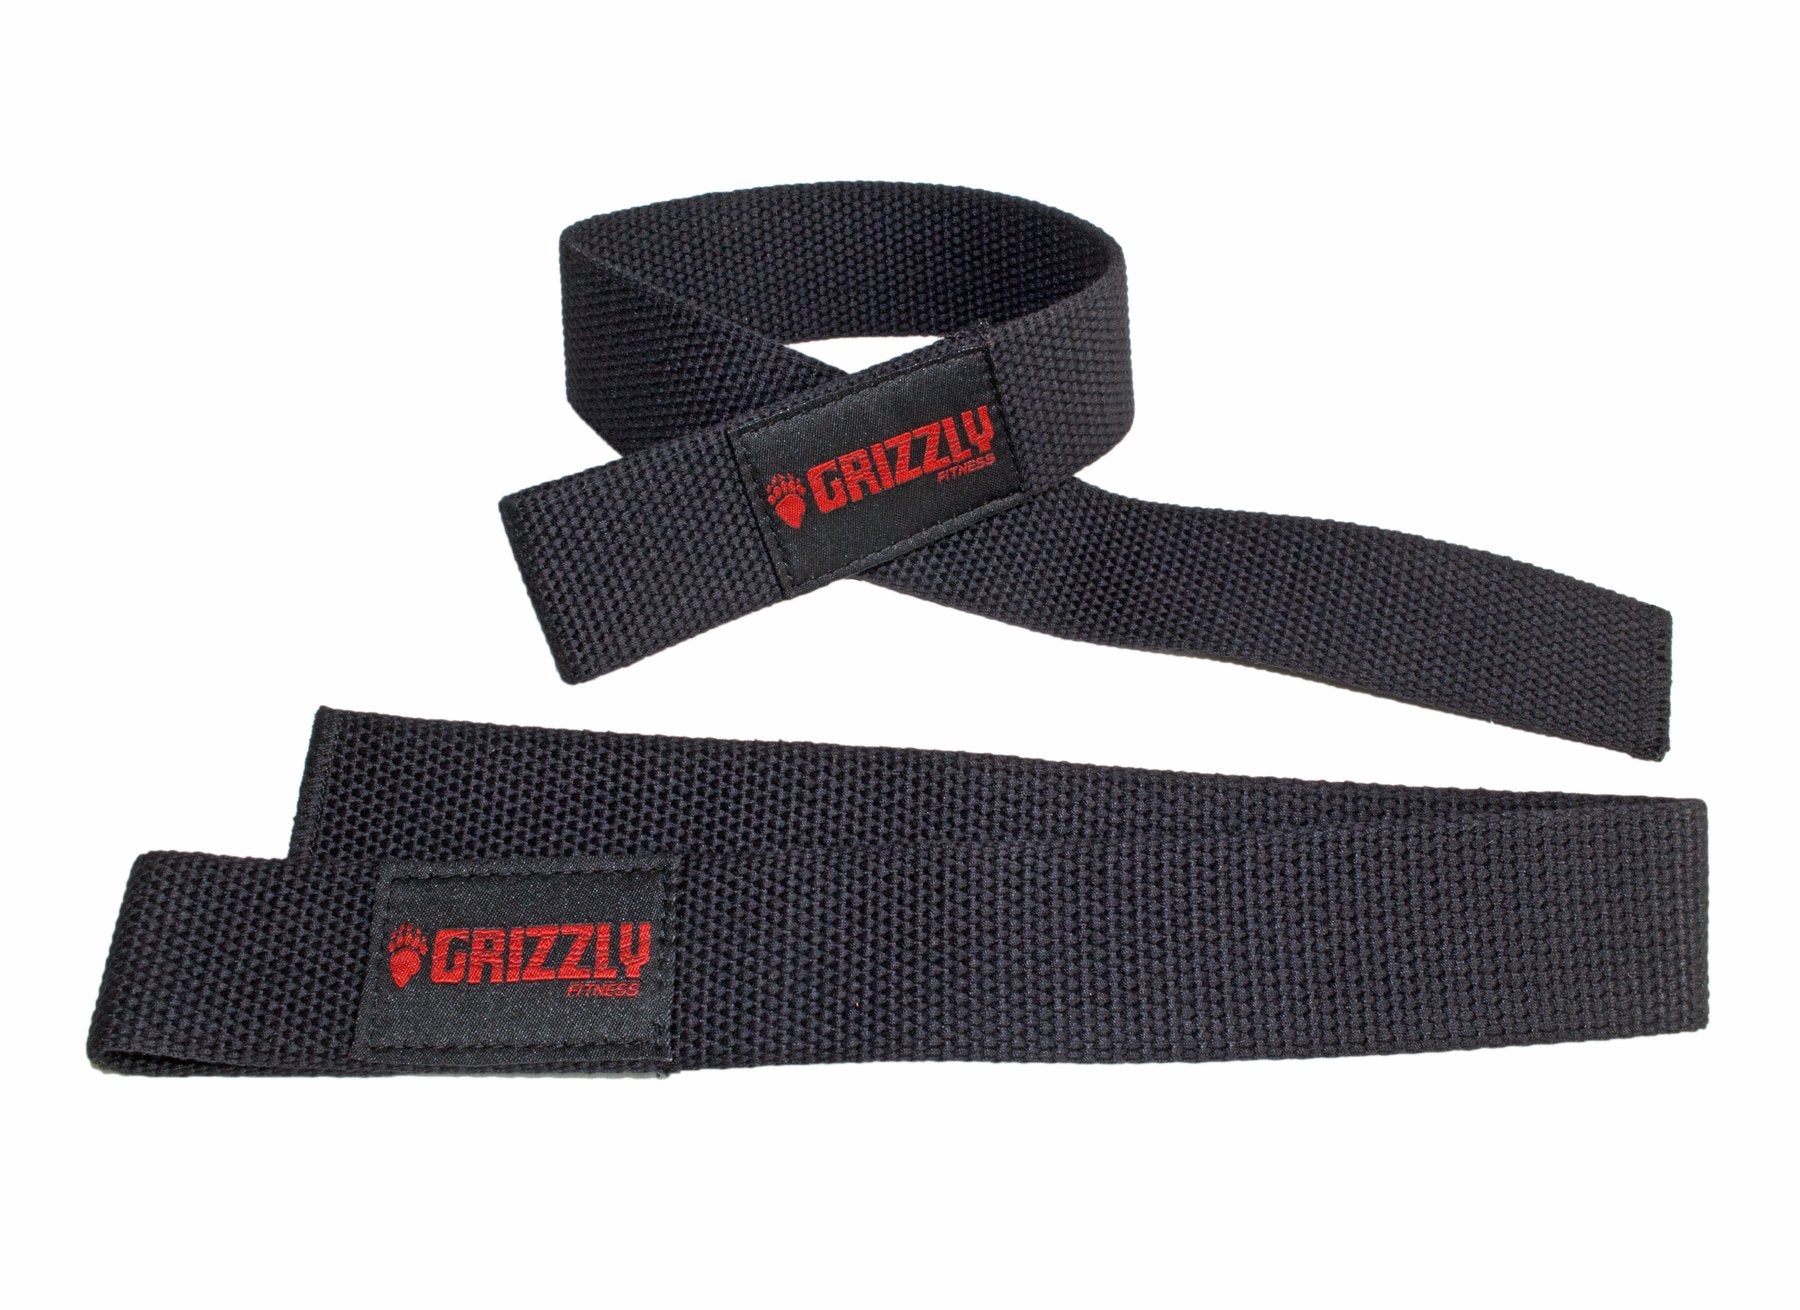 4 Inch Leather Weightlifting Belt - COREZONE Sports